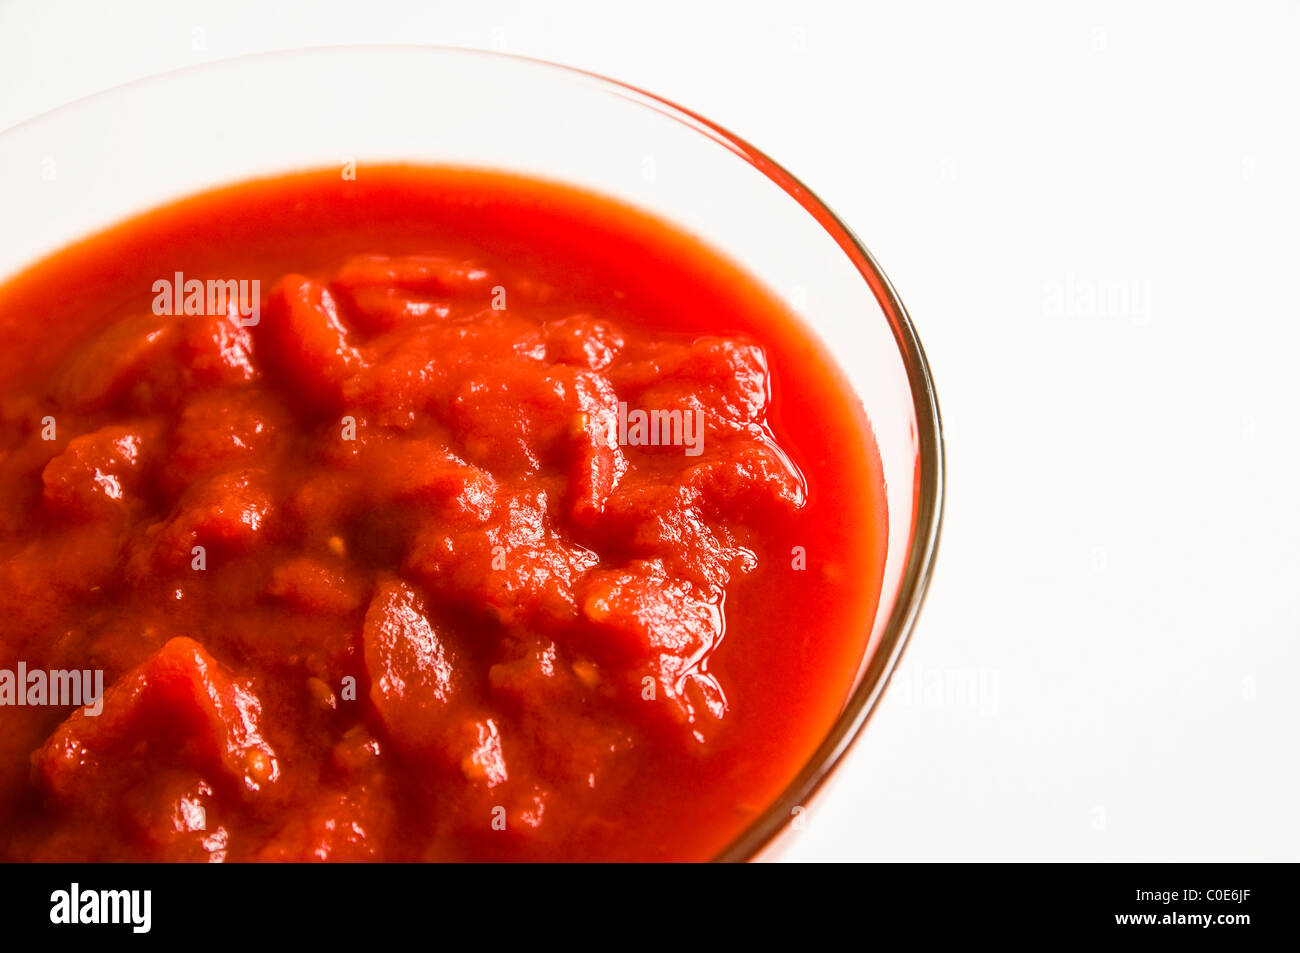 Chopped  (tinned ) tomatoes in a glass bowl. Stock Photo